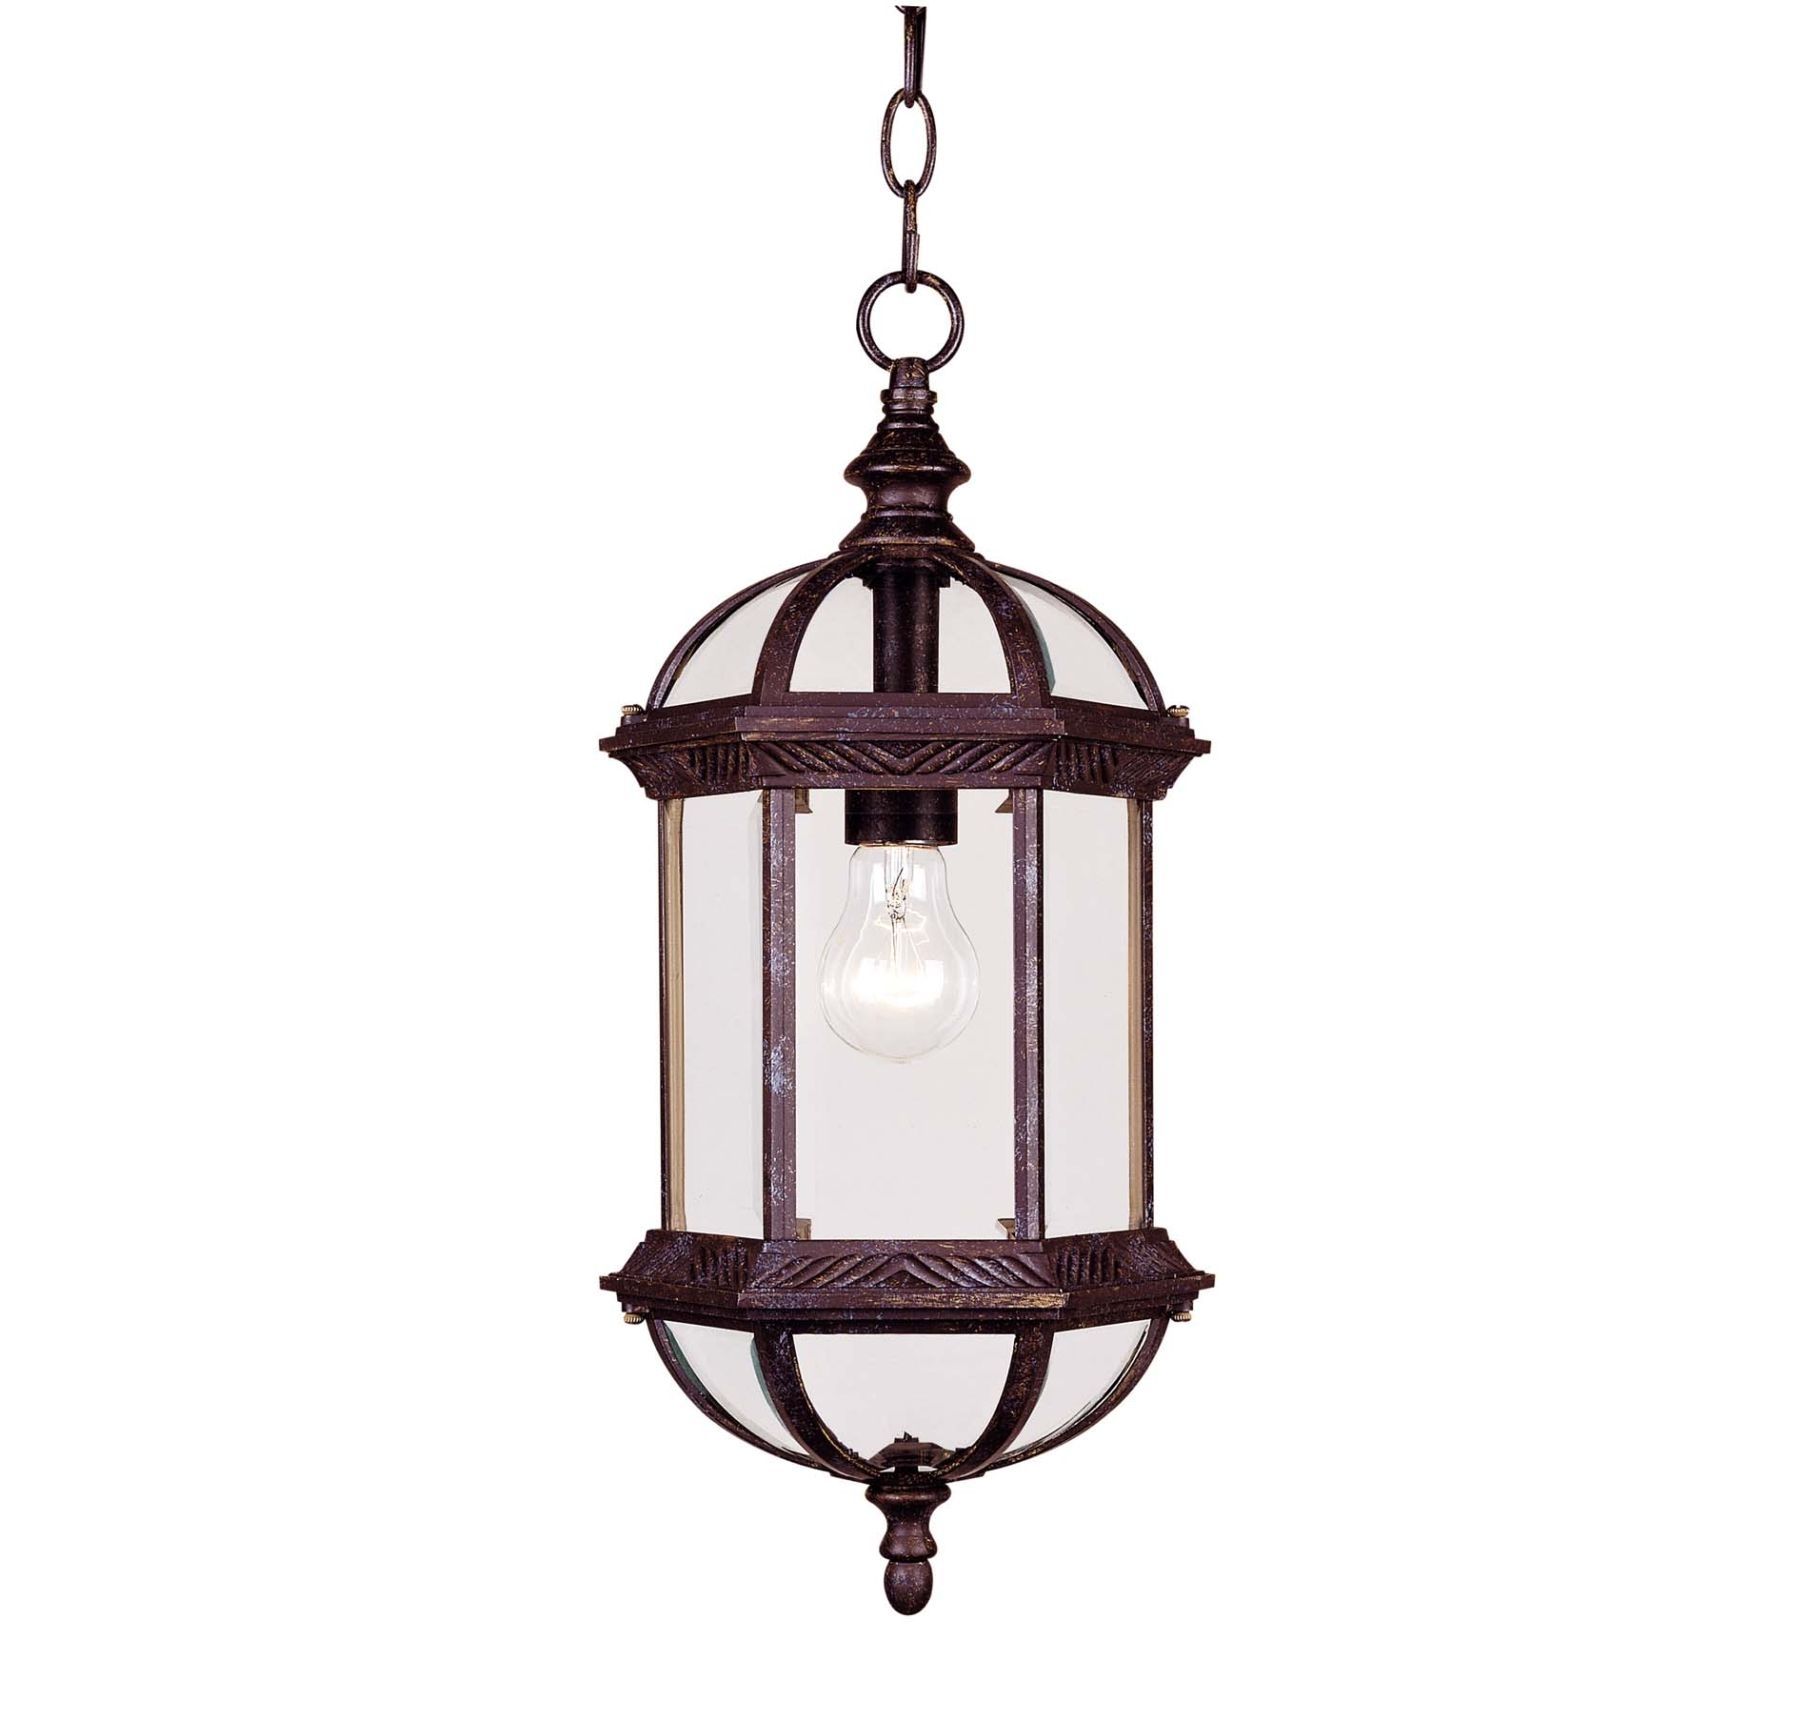 Outdoor Light : Glamorous Rustic Outdoor Pole Lighting , Rustic Regarding Outdoor Pole Lanterns (Photo 1 of 20)